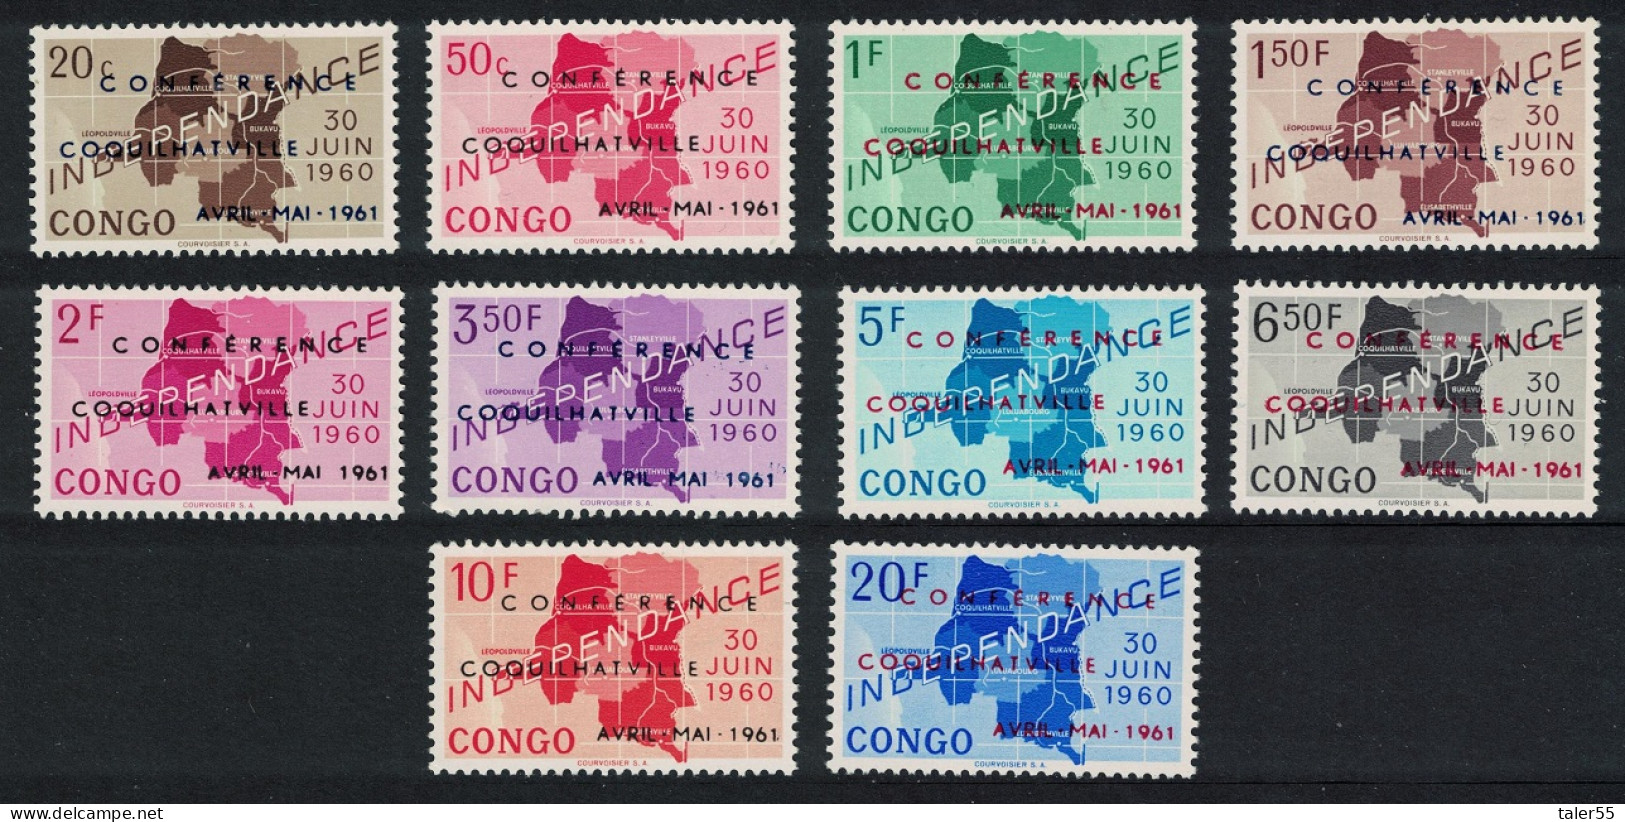 DR Congo Optd' CONFERENCE COQUILHATVILLE' 10v 1961 MNH SG#407-416 - Mint/hinged